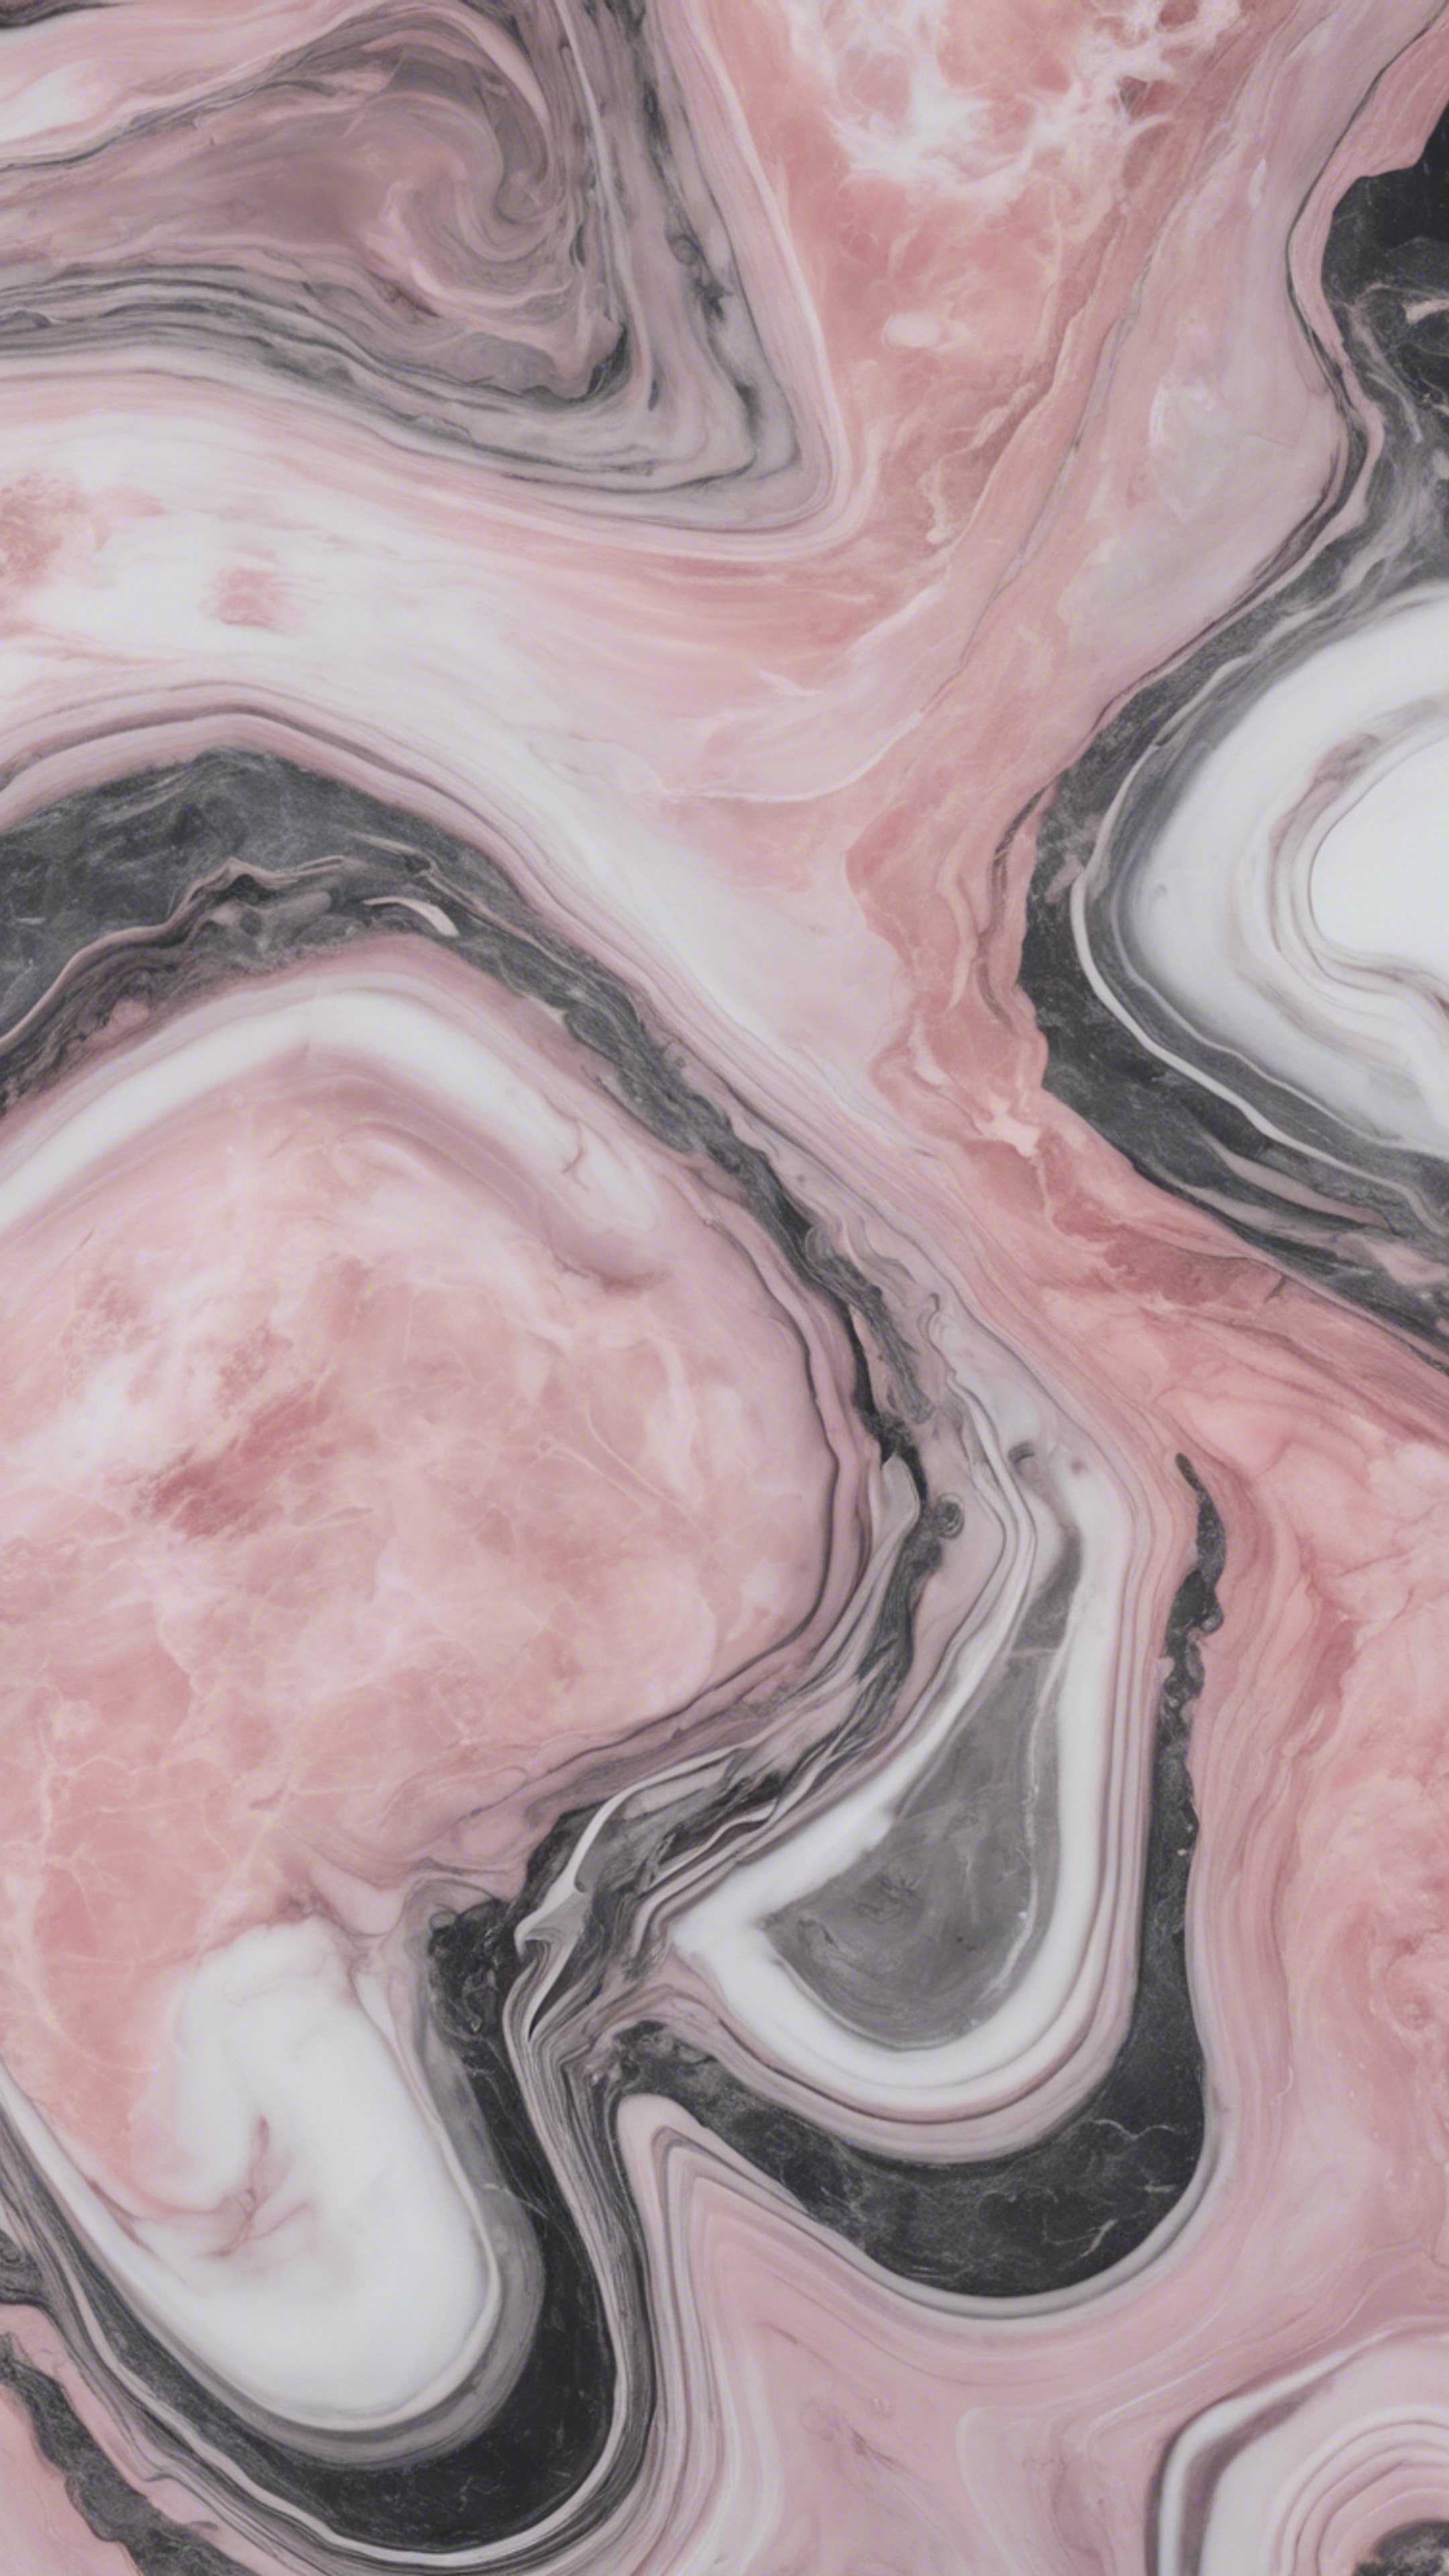 A swirling pattern of pink, white, and charcoal grey characteristic of polished pink marble. Tapet[fb90daec103040ffbaff]